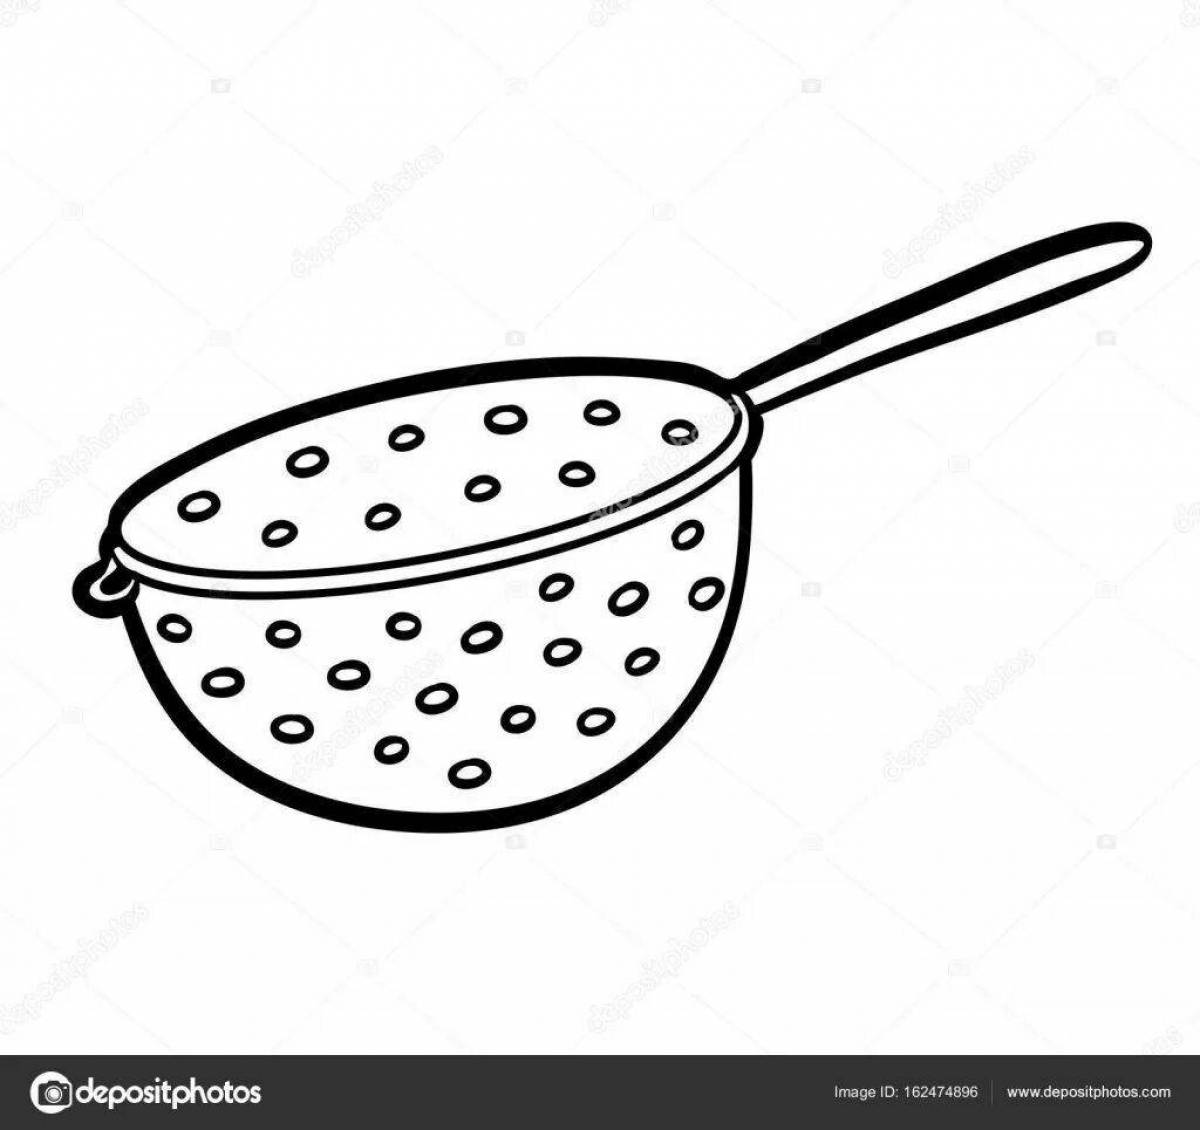 Colorful sieve coloring page for kids